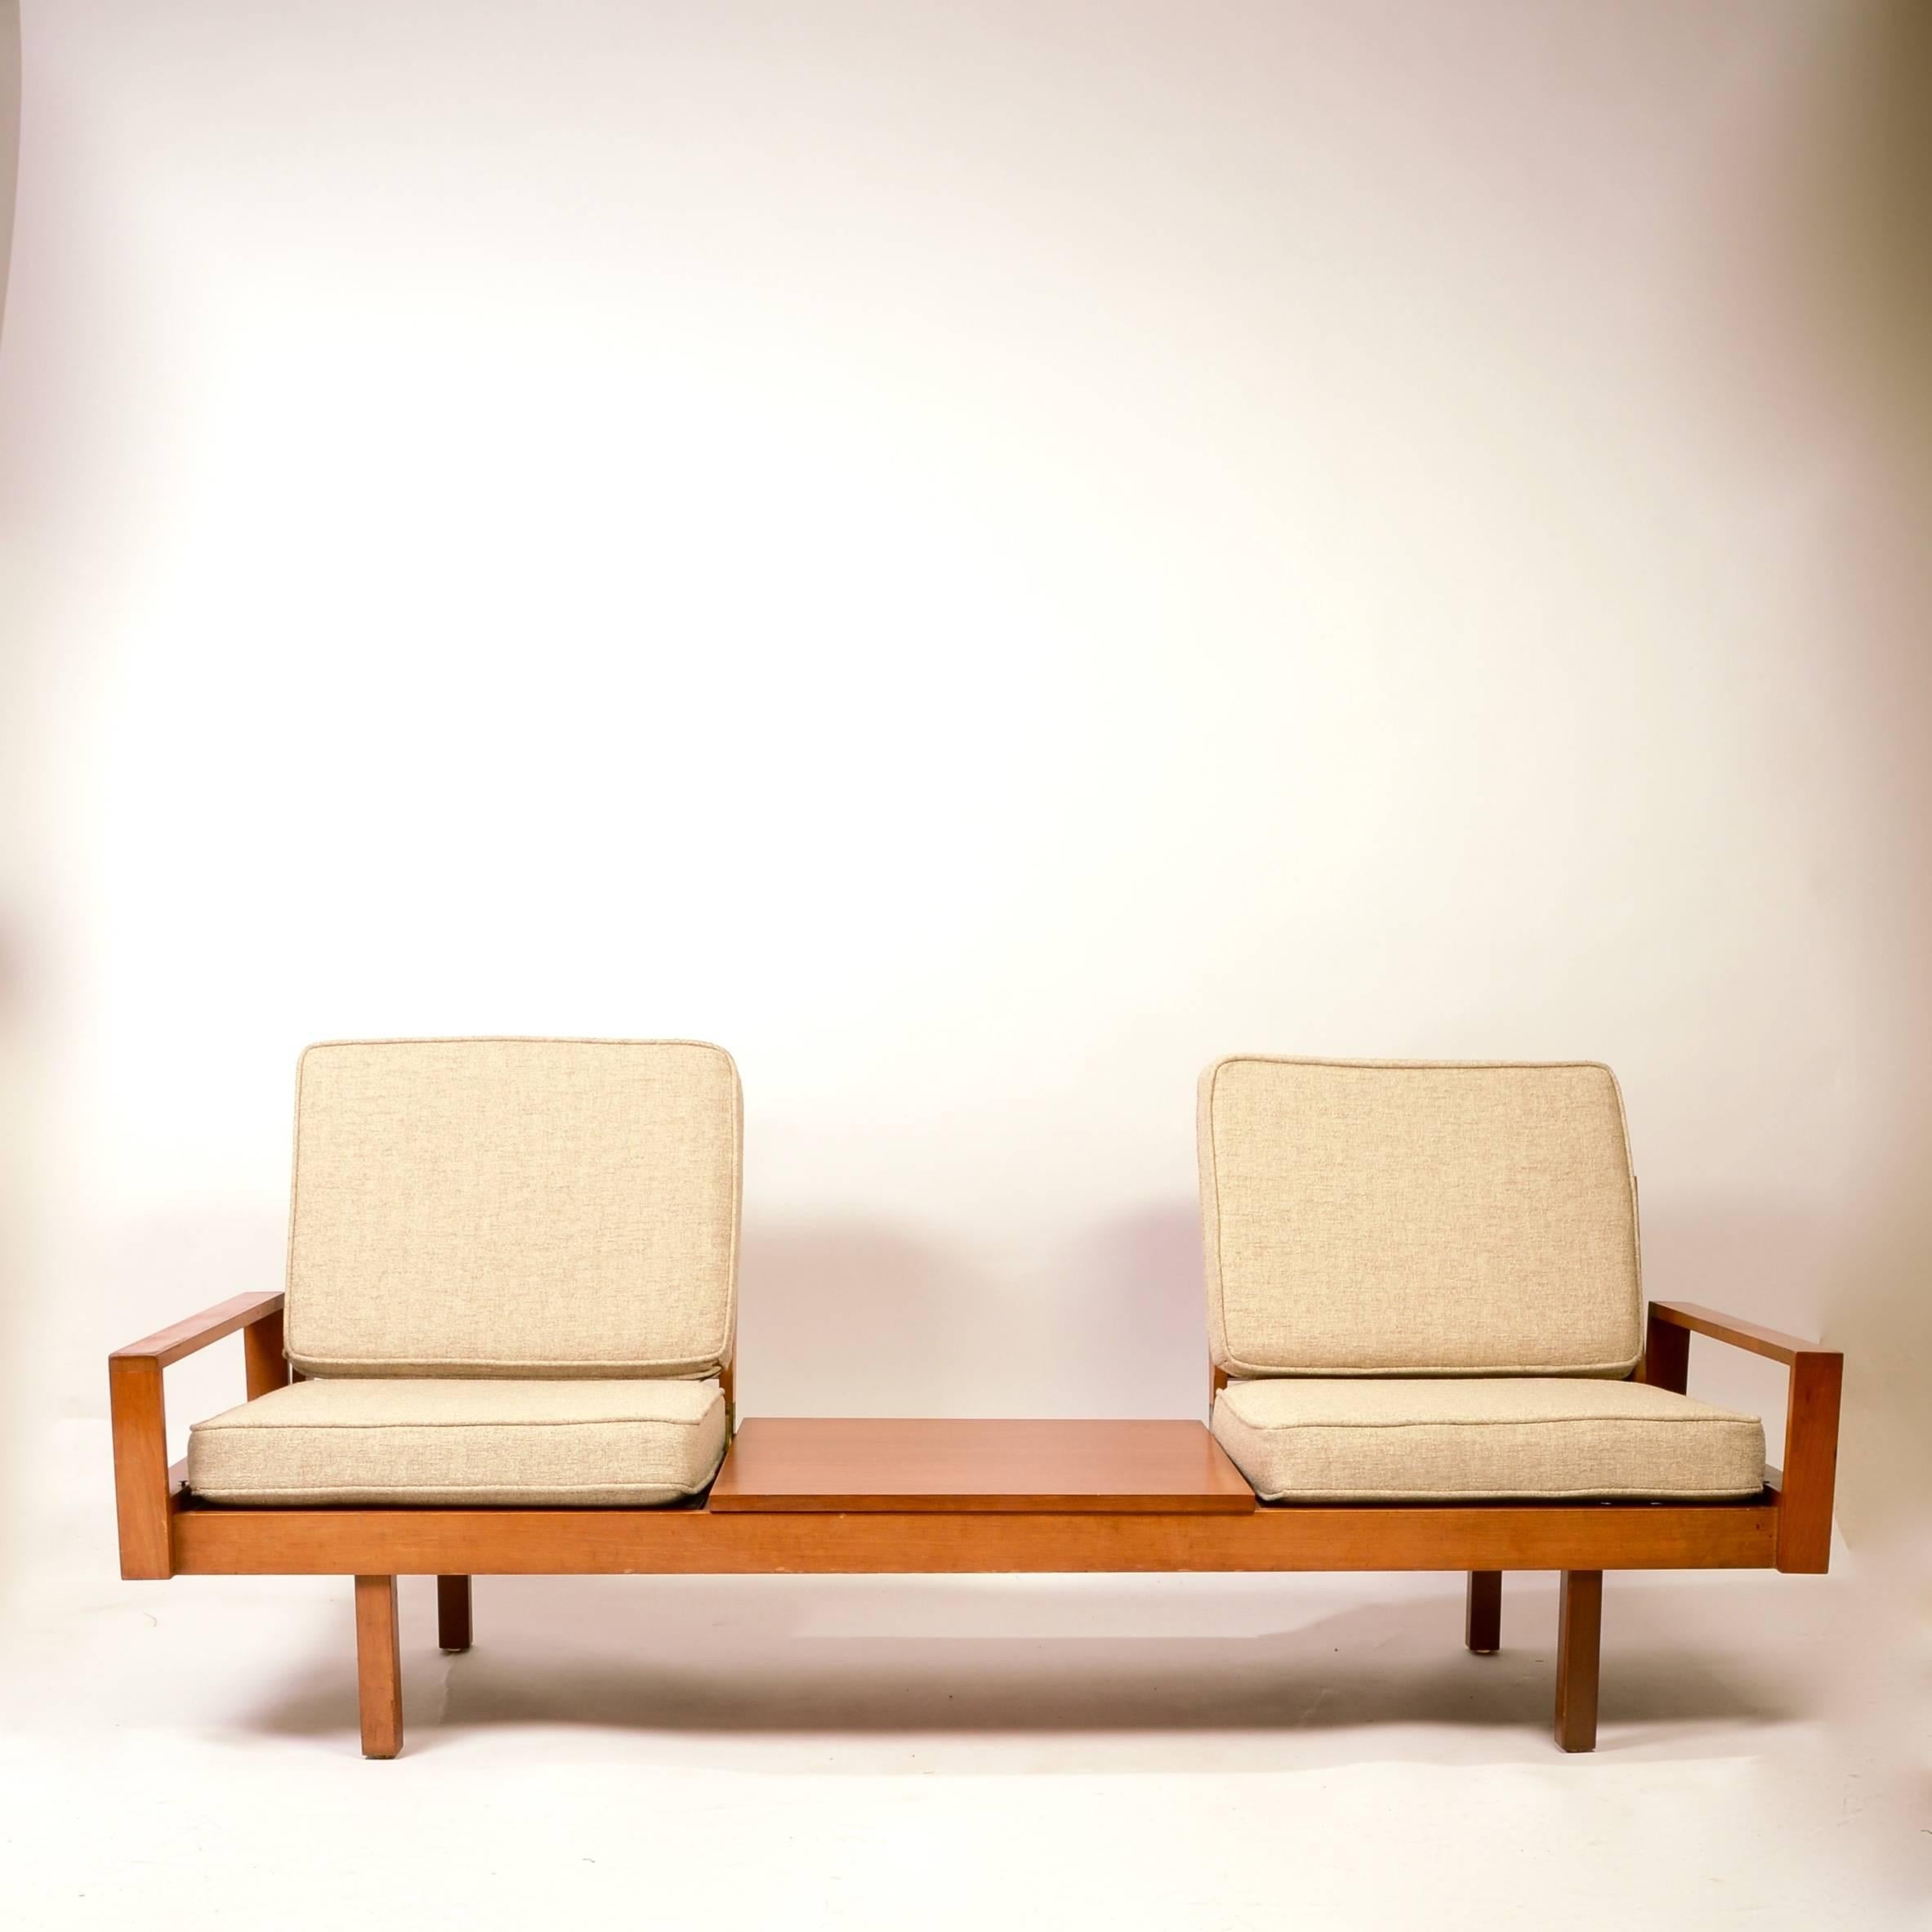 This sofa is part of a modular set by Martin Borenstein for Brown & Saltman. The seats, armrests and walnut tables of this system can be rearranged to any number of ways.  We are selling this set which includes 2 3-bay units, 2 2-bay units, and a